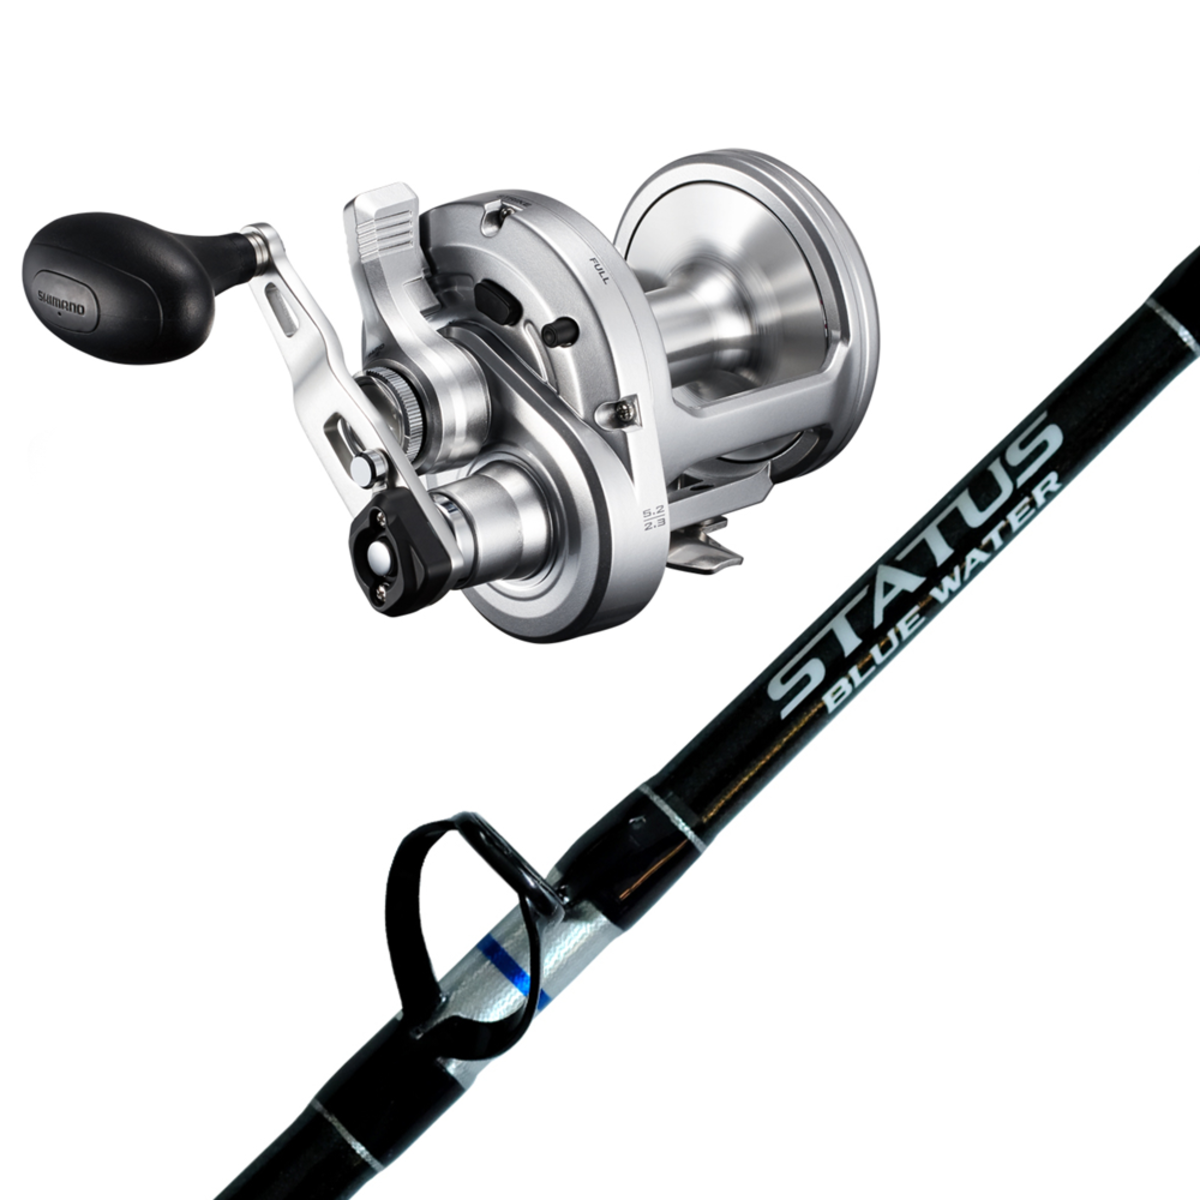 https://www.smartmarine.co.nz/cdn/images/products/xlarge/8074001_speedwater_combo.png